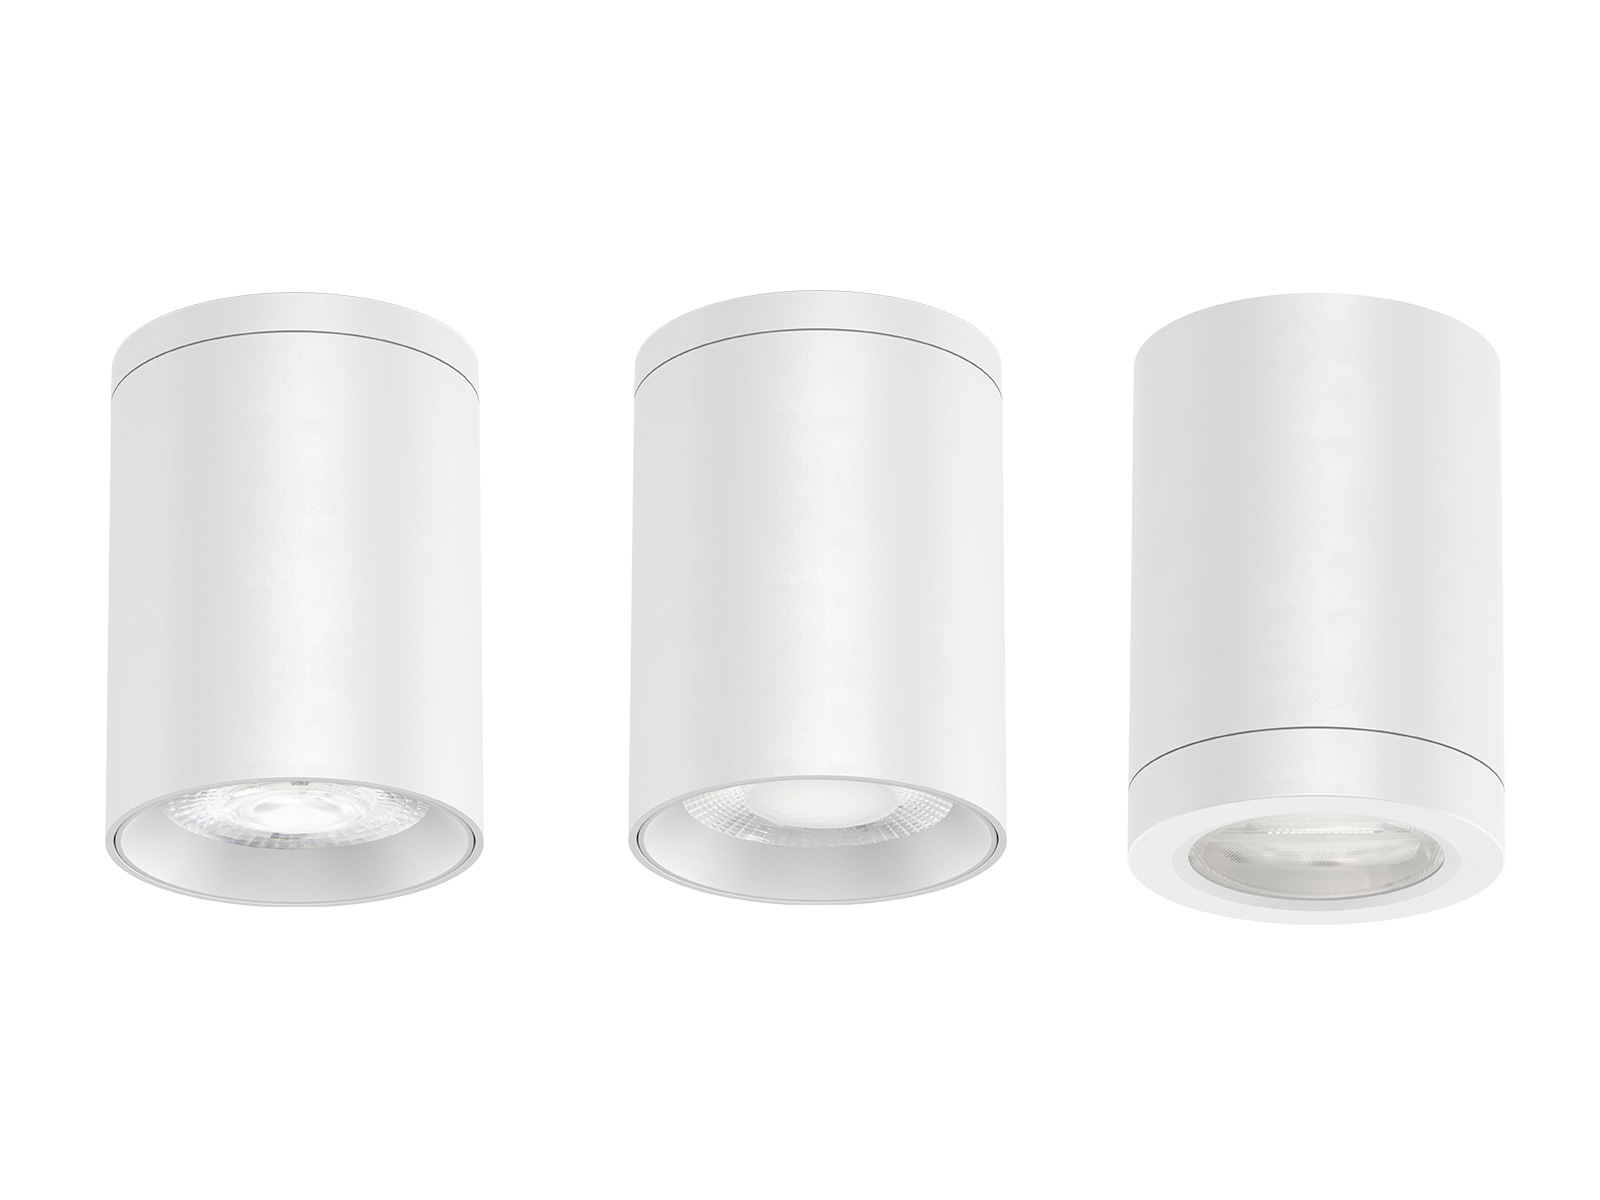 DL277 smart led recessed trimless downlights